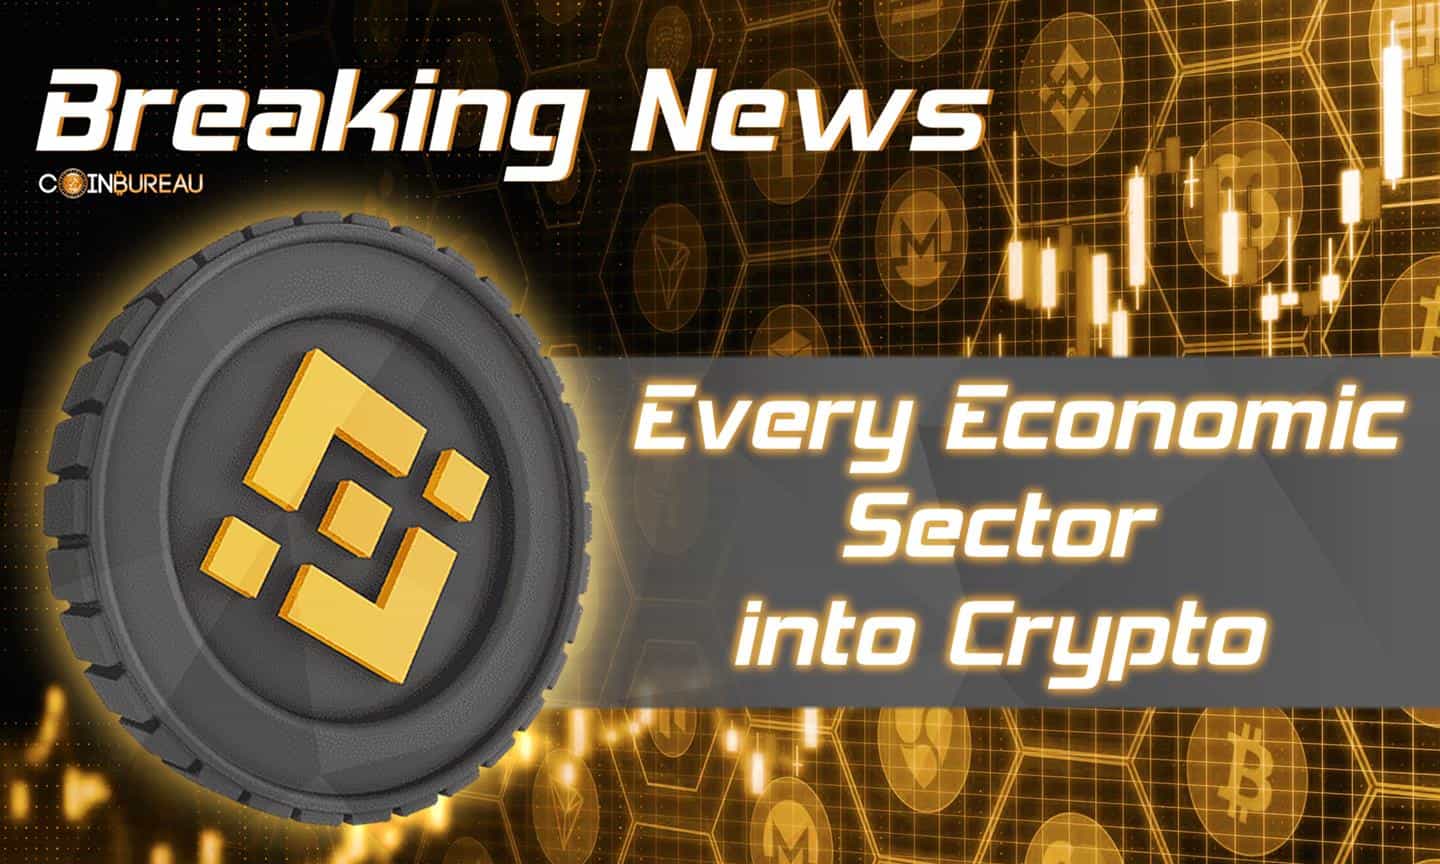 Binance Plans to Pull 'Every Economic Sector’ Into Crypto: Report